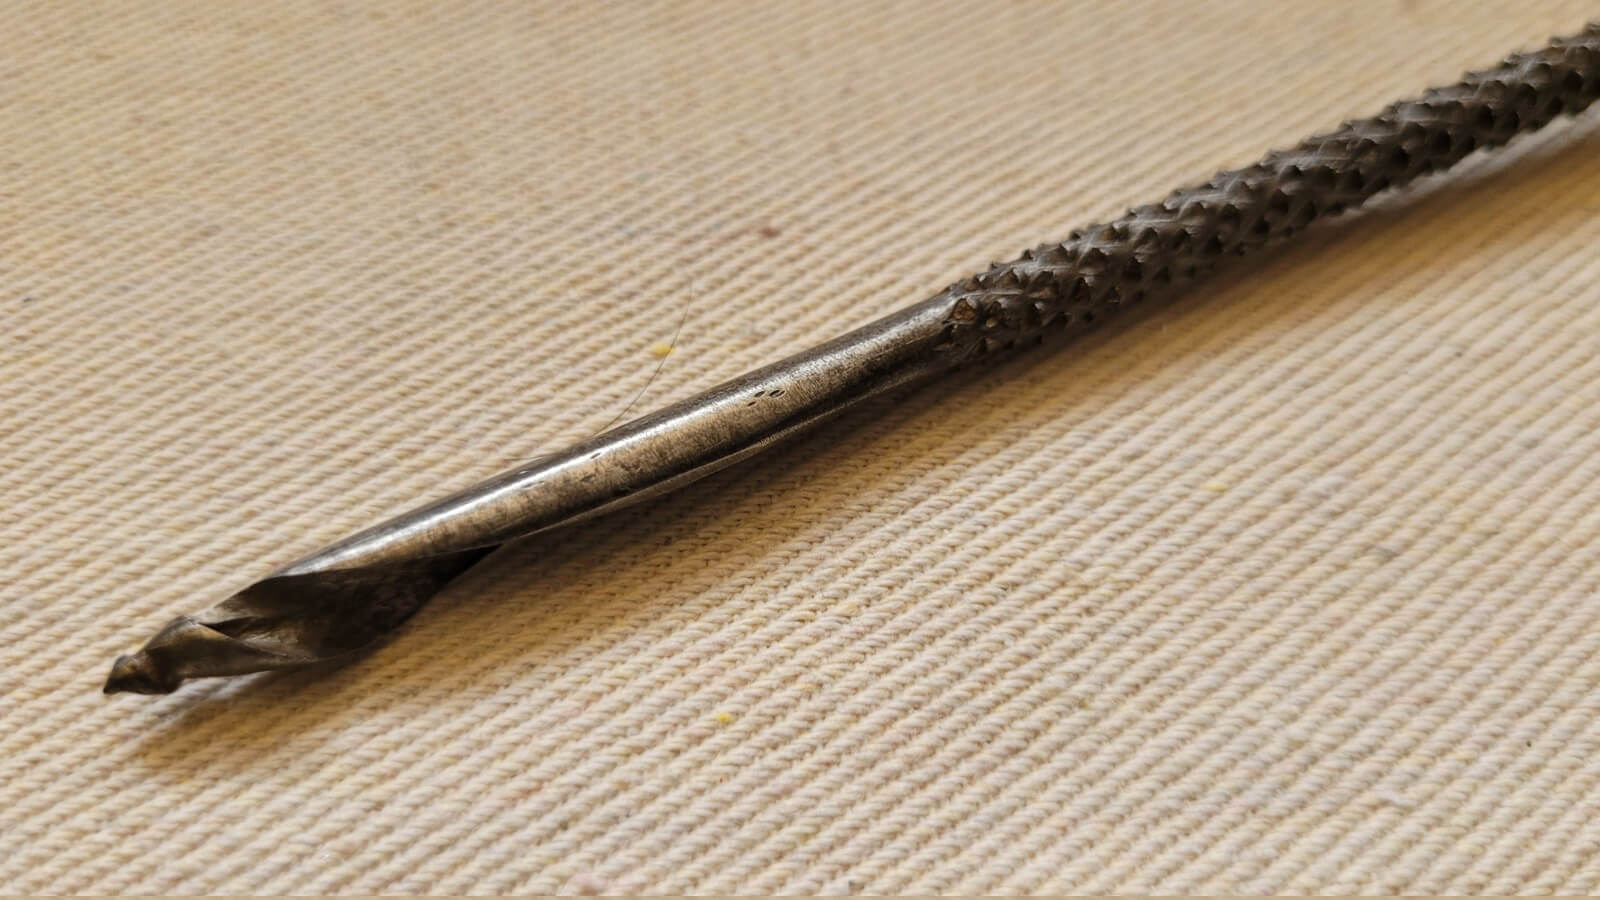 Rare Will #370 Spiral Tire Repair Reamer Probe Made in Canada - Vintage Car Mechanic and Automotive Collectible Tools